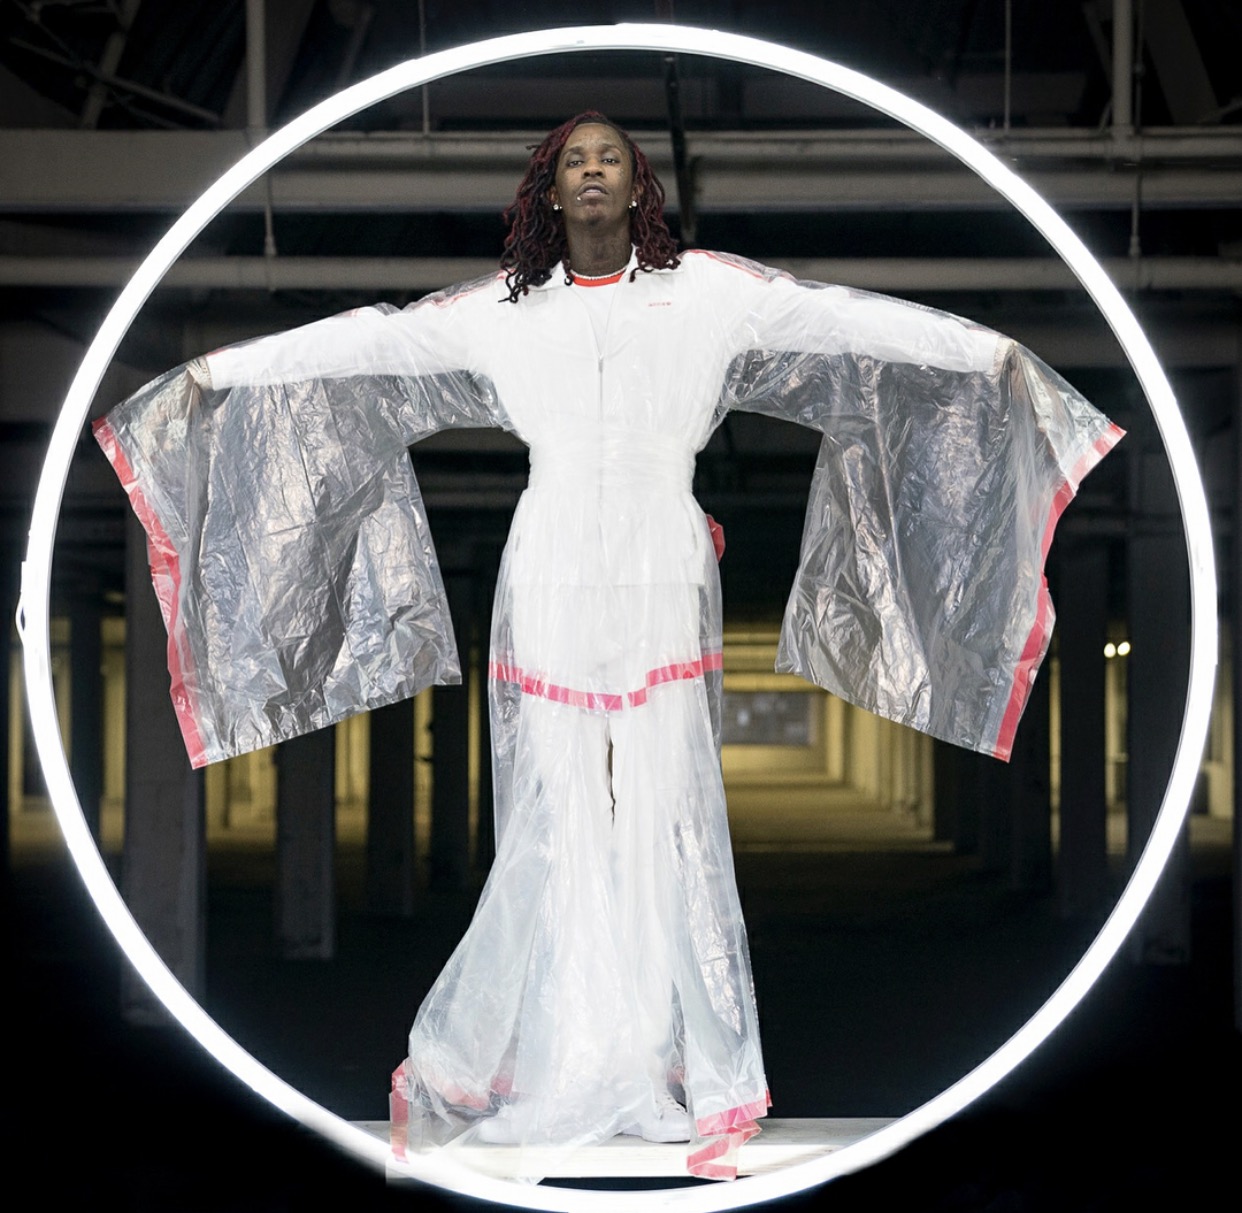 How Young Thug's Gender Fluid Style Made Him a Fashion Icon